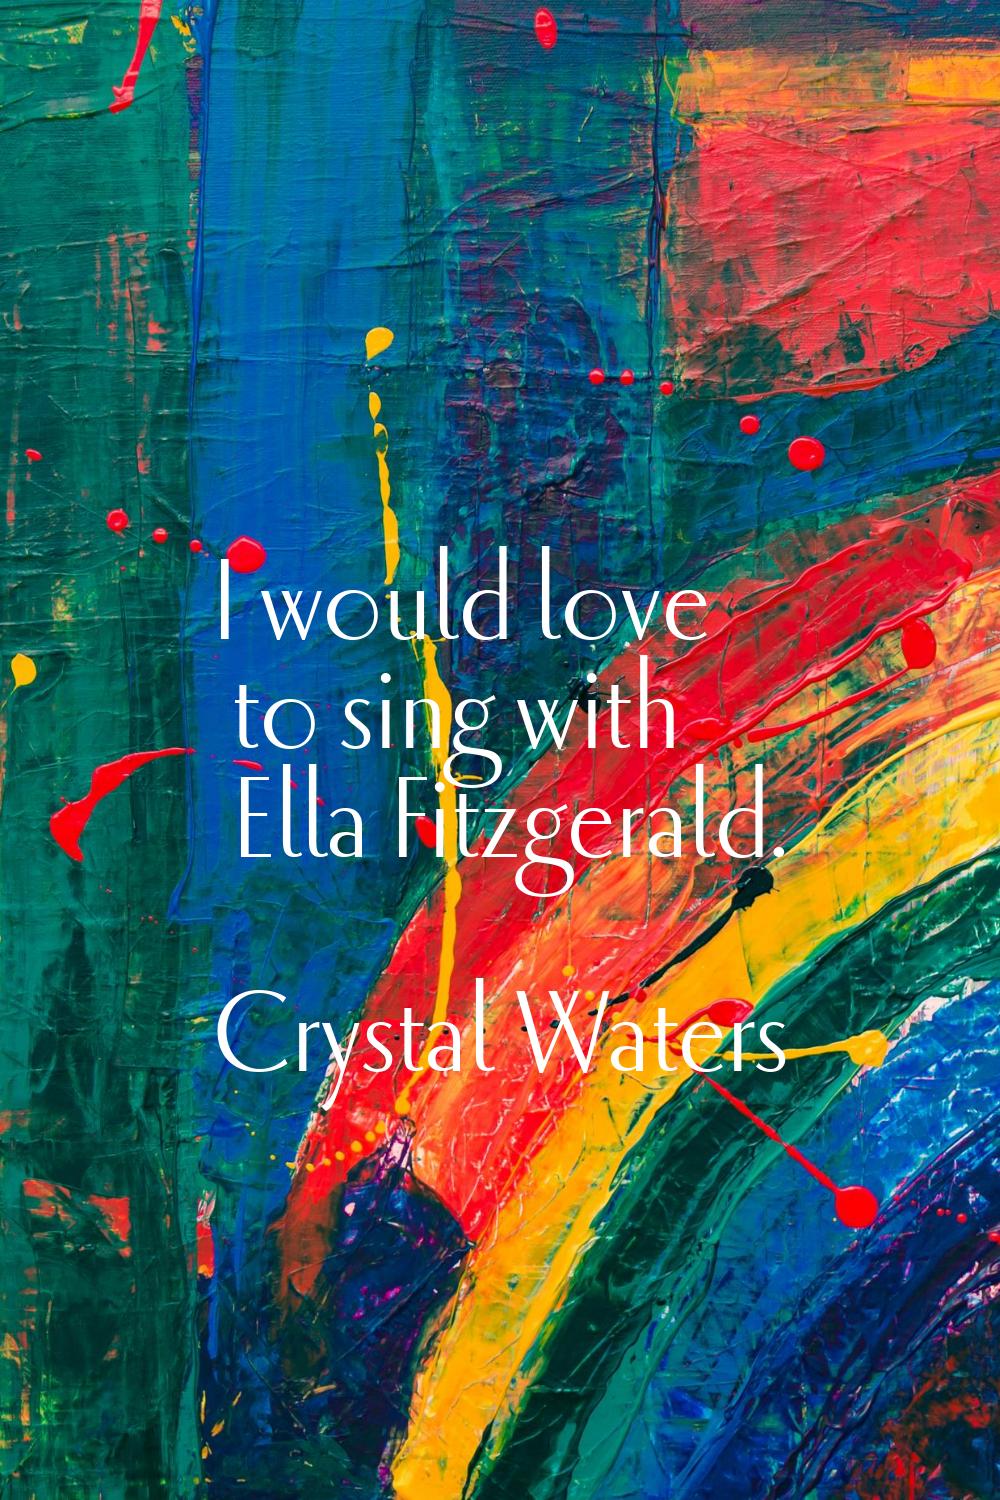 I would love to sing with Ella Fitzgerald.